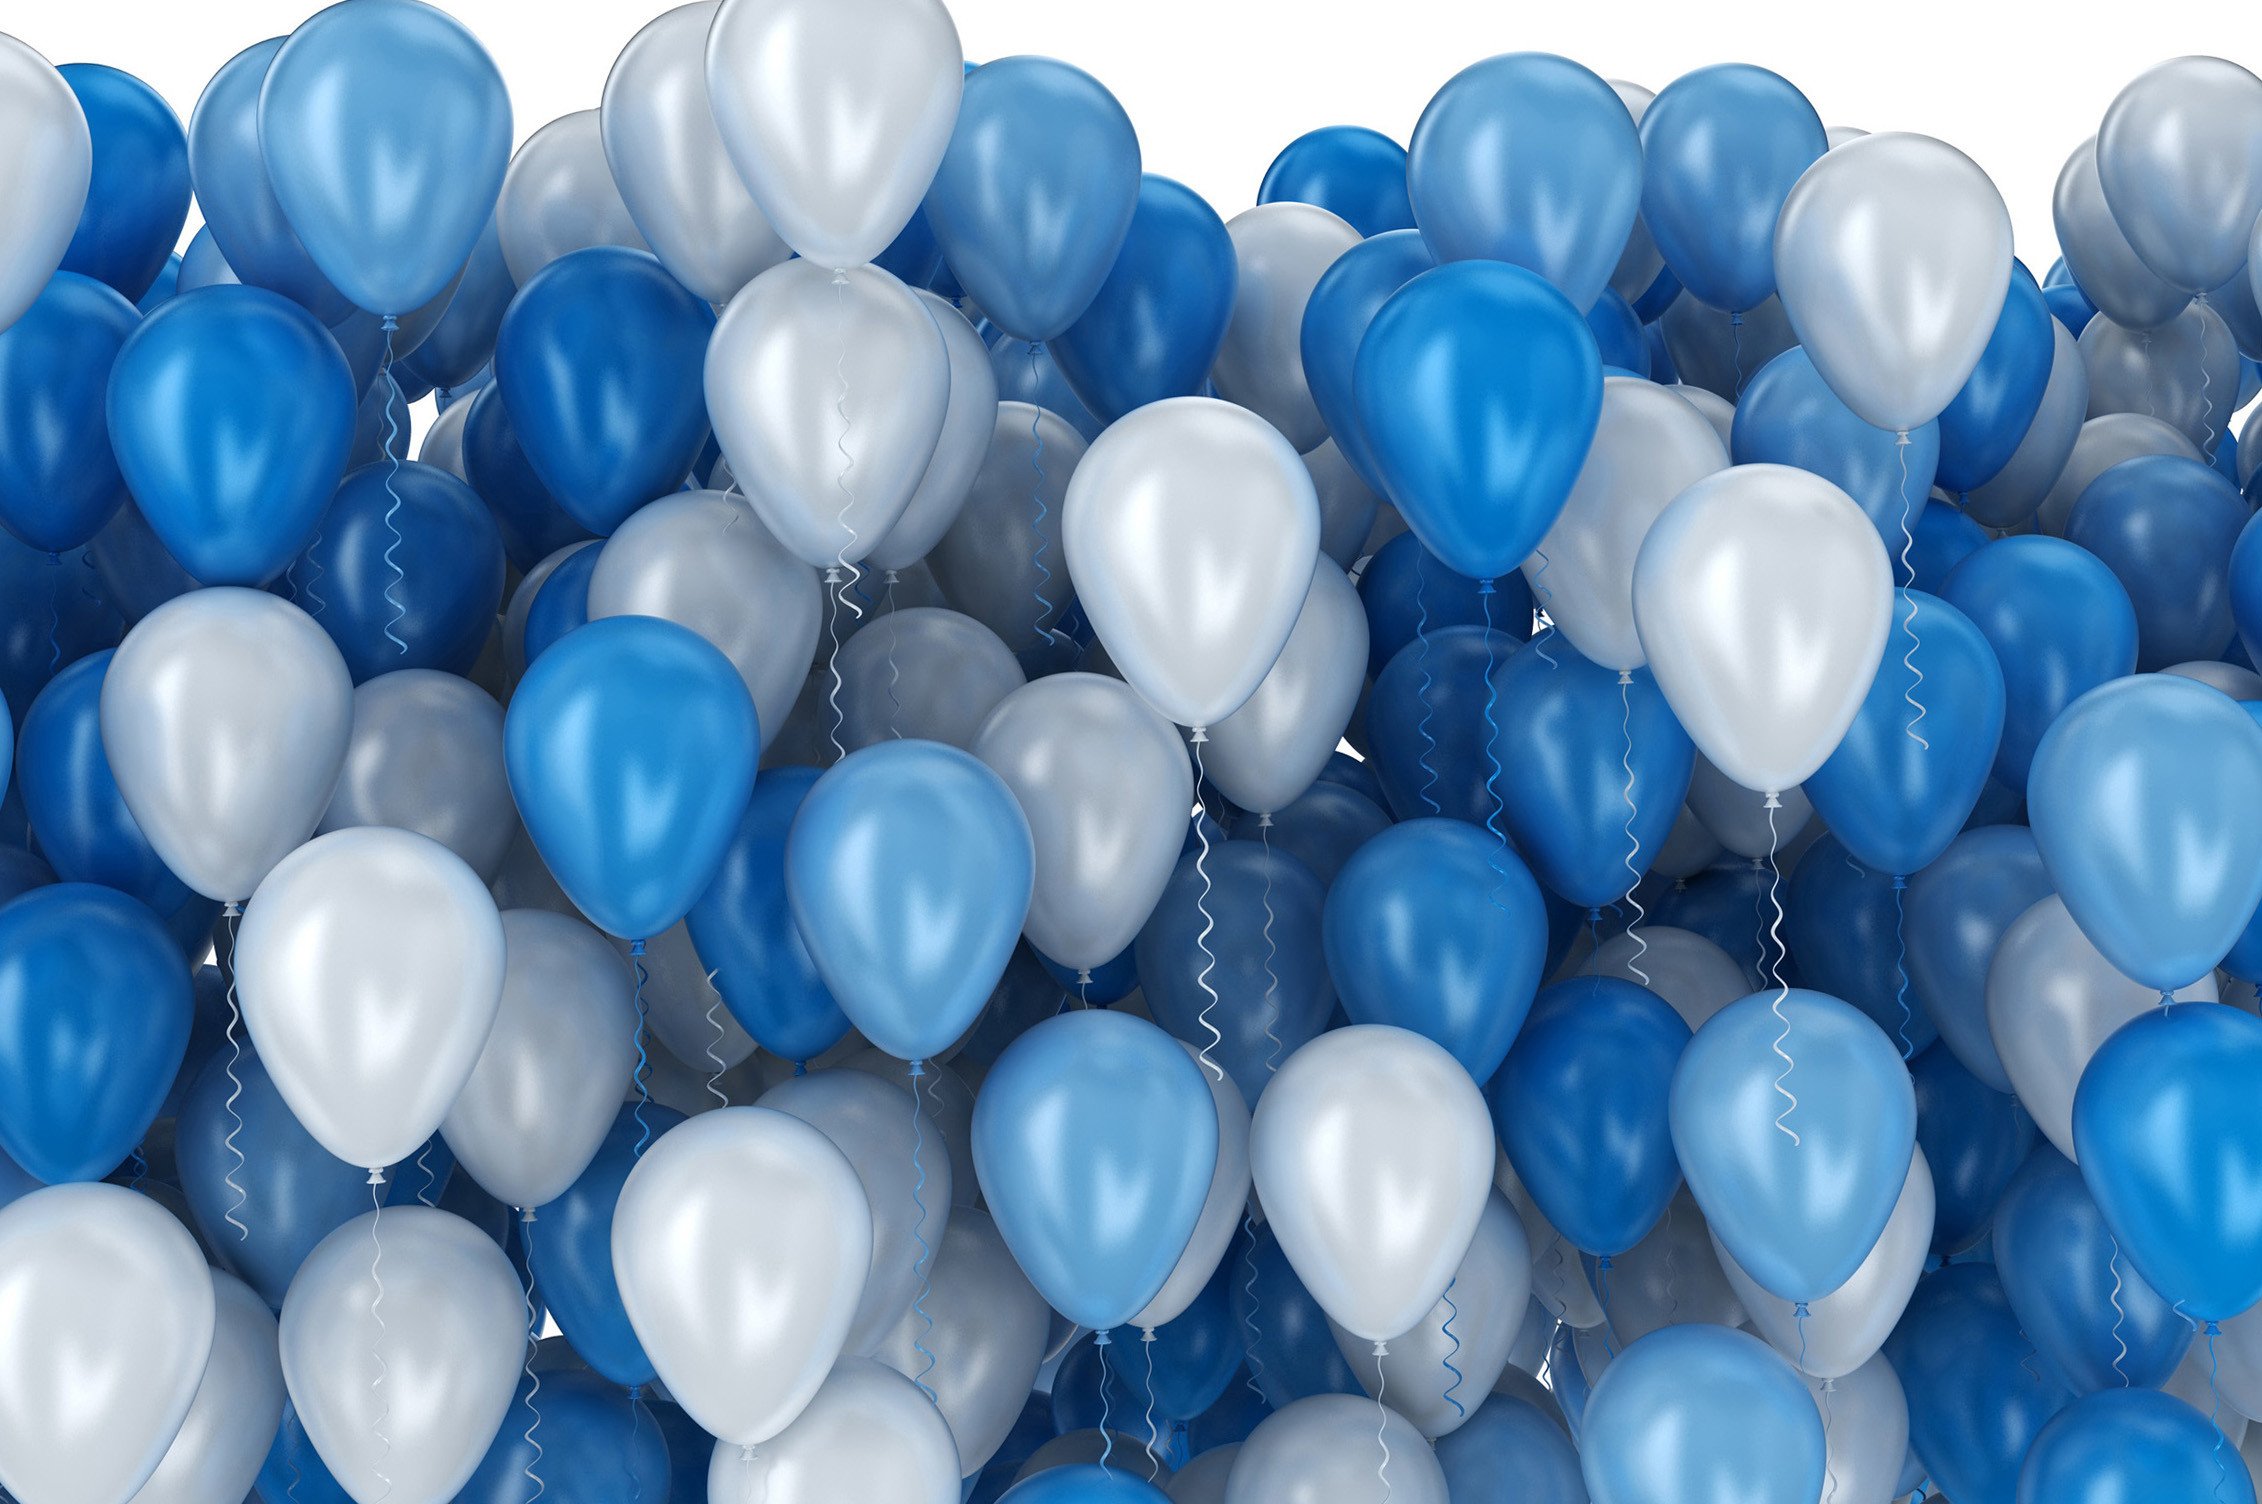 2262x1504 Blue And White Balloons On White Background